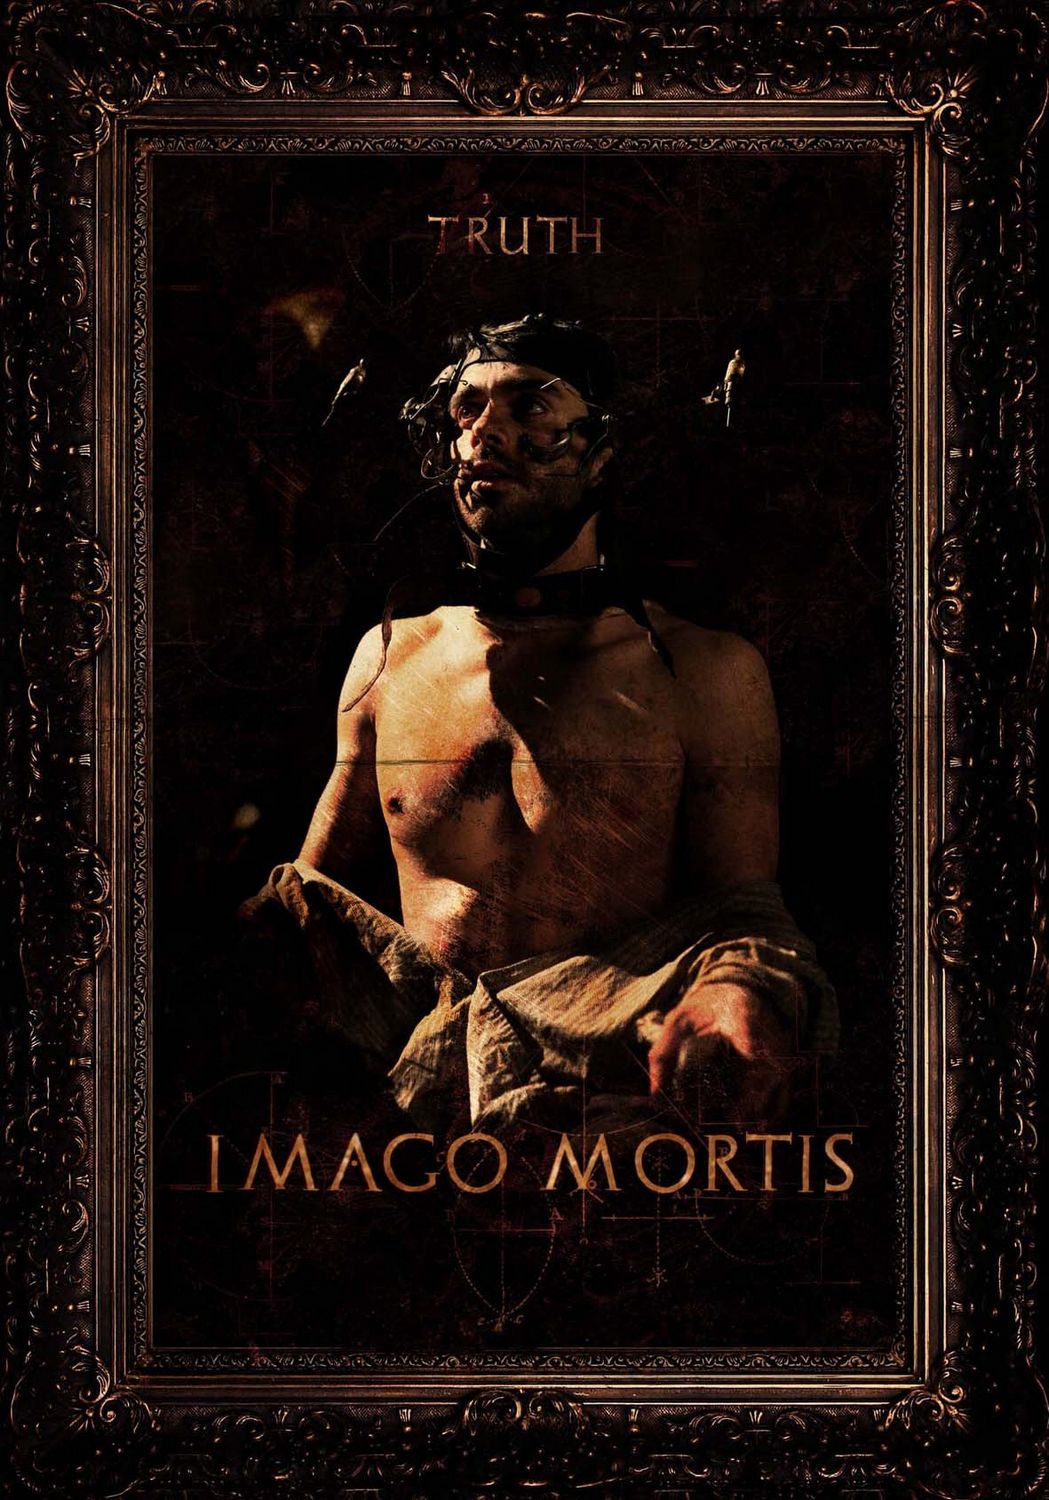 Extra Large Movie Poster Image for Imago mortis (#4 of 4)